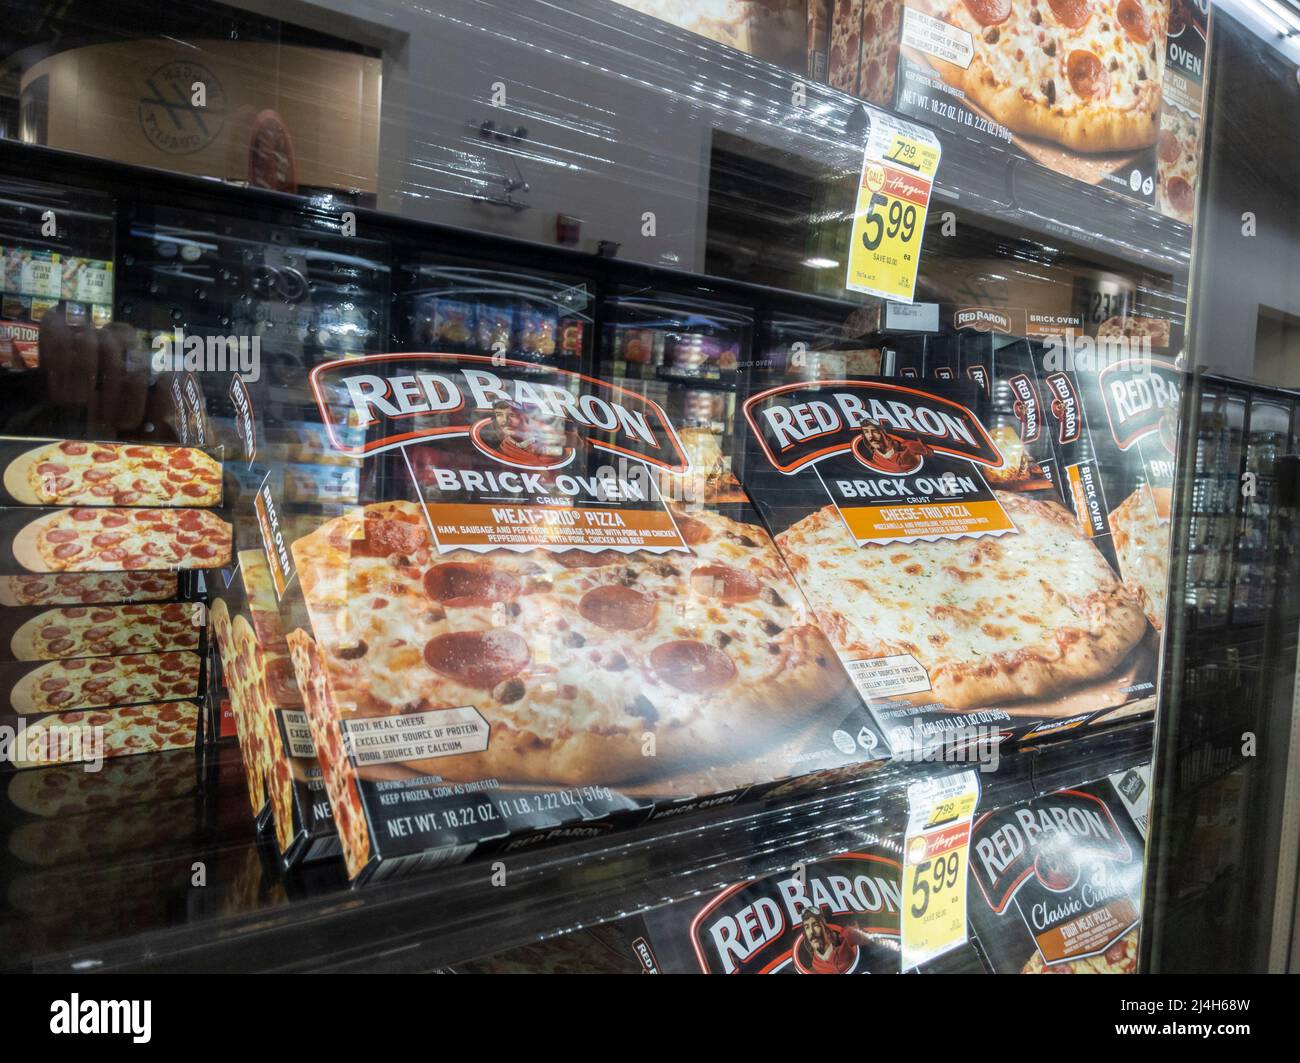 Woodinville, WA USA - circa April 2022: Angled view of Red Baron brandfrozen pizzas in the freezer aisle of a Haggen grocery store. Stock Photo